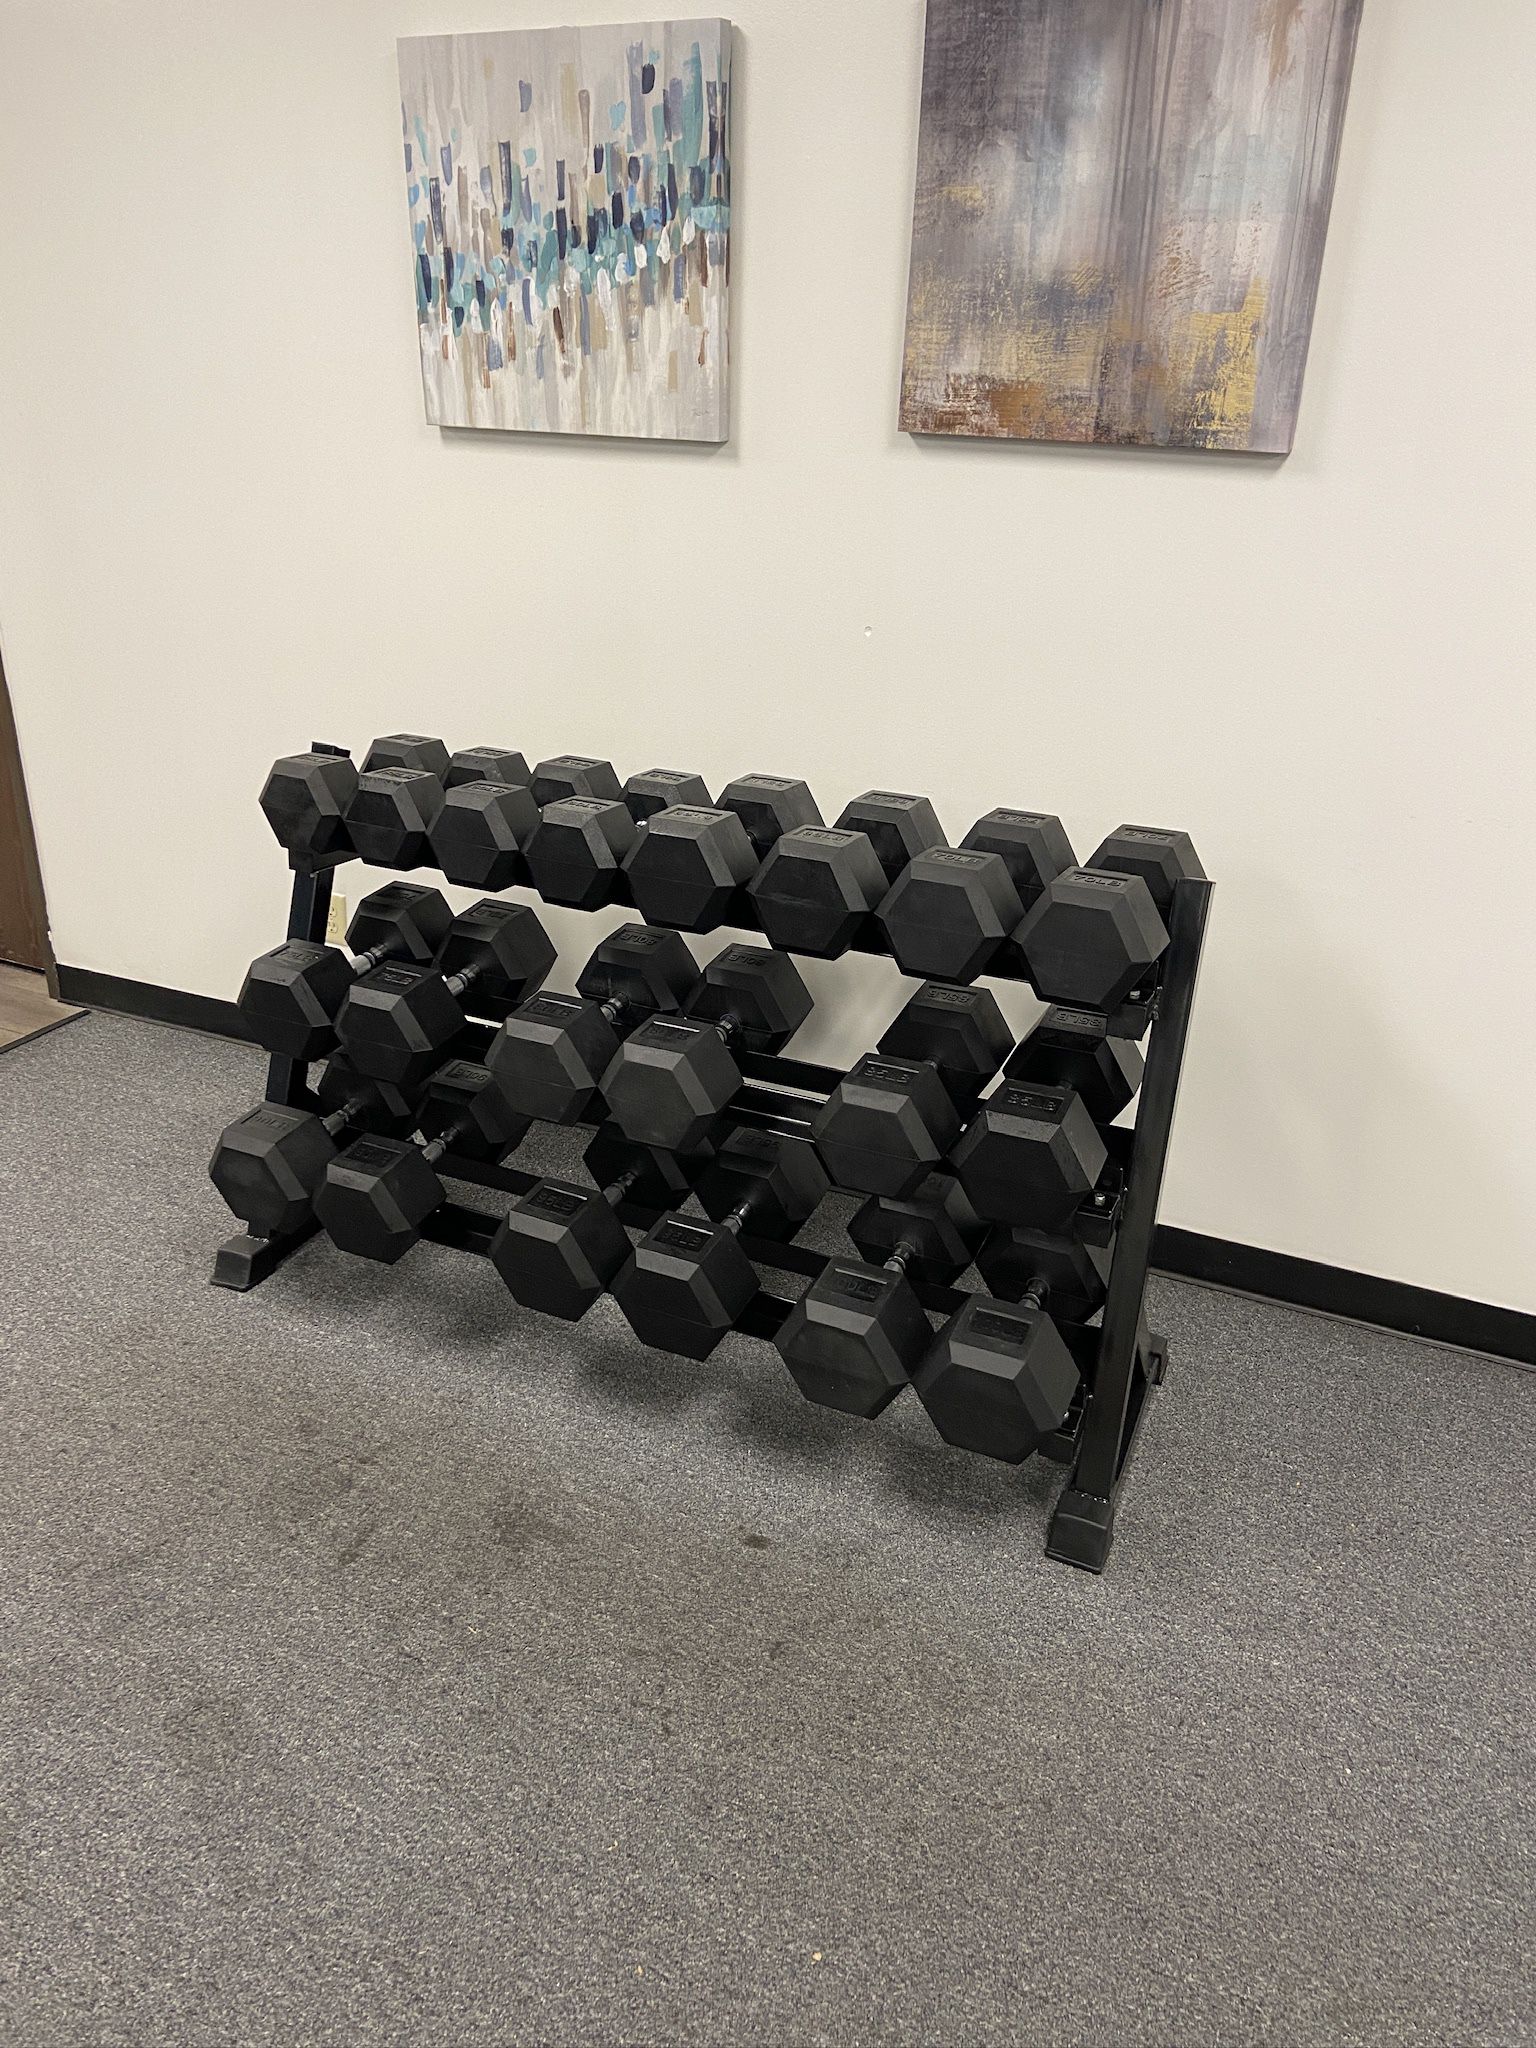 New 55LB-100LB Rubber Hex Dumbbells Pairs Total 1,550LBS With Rack